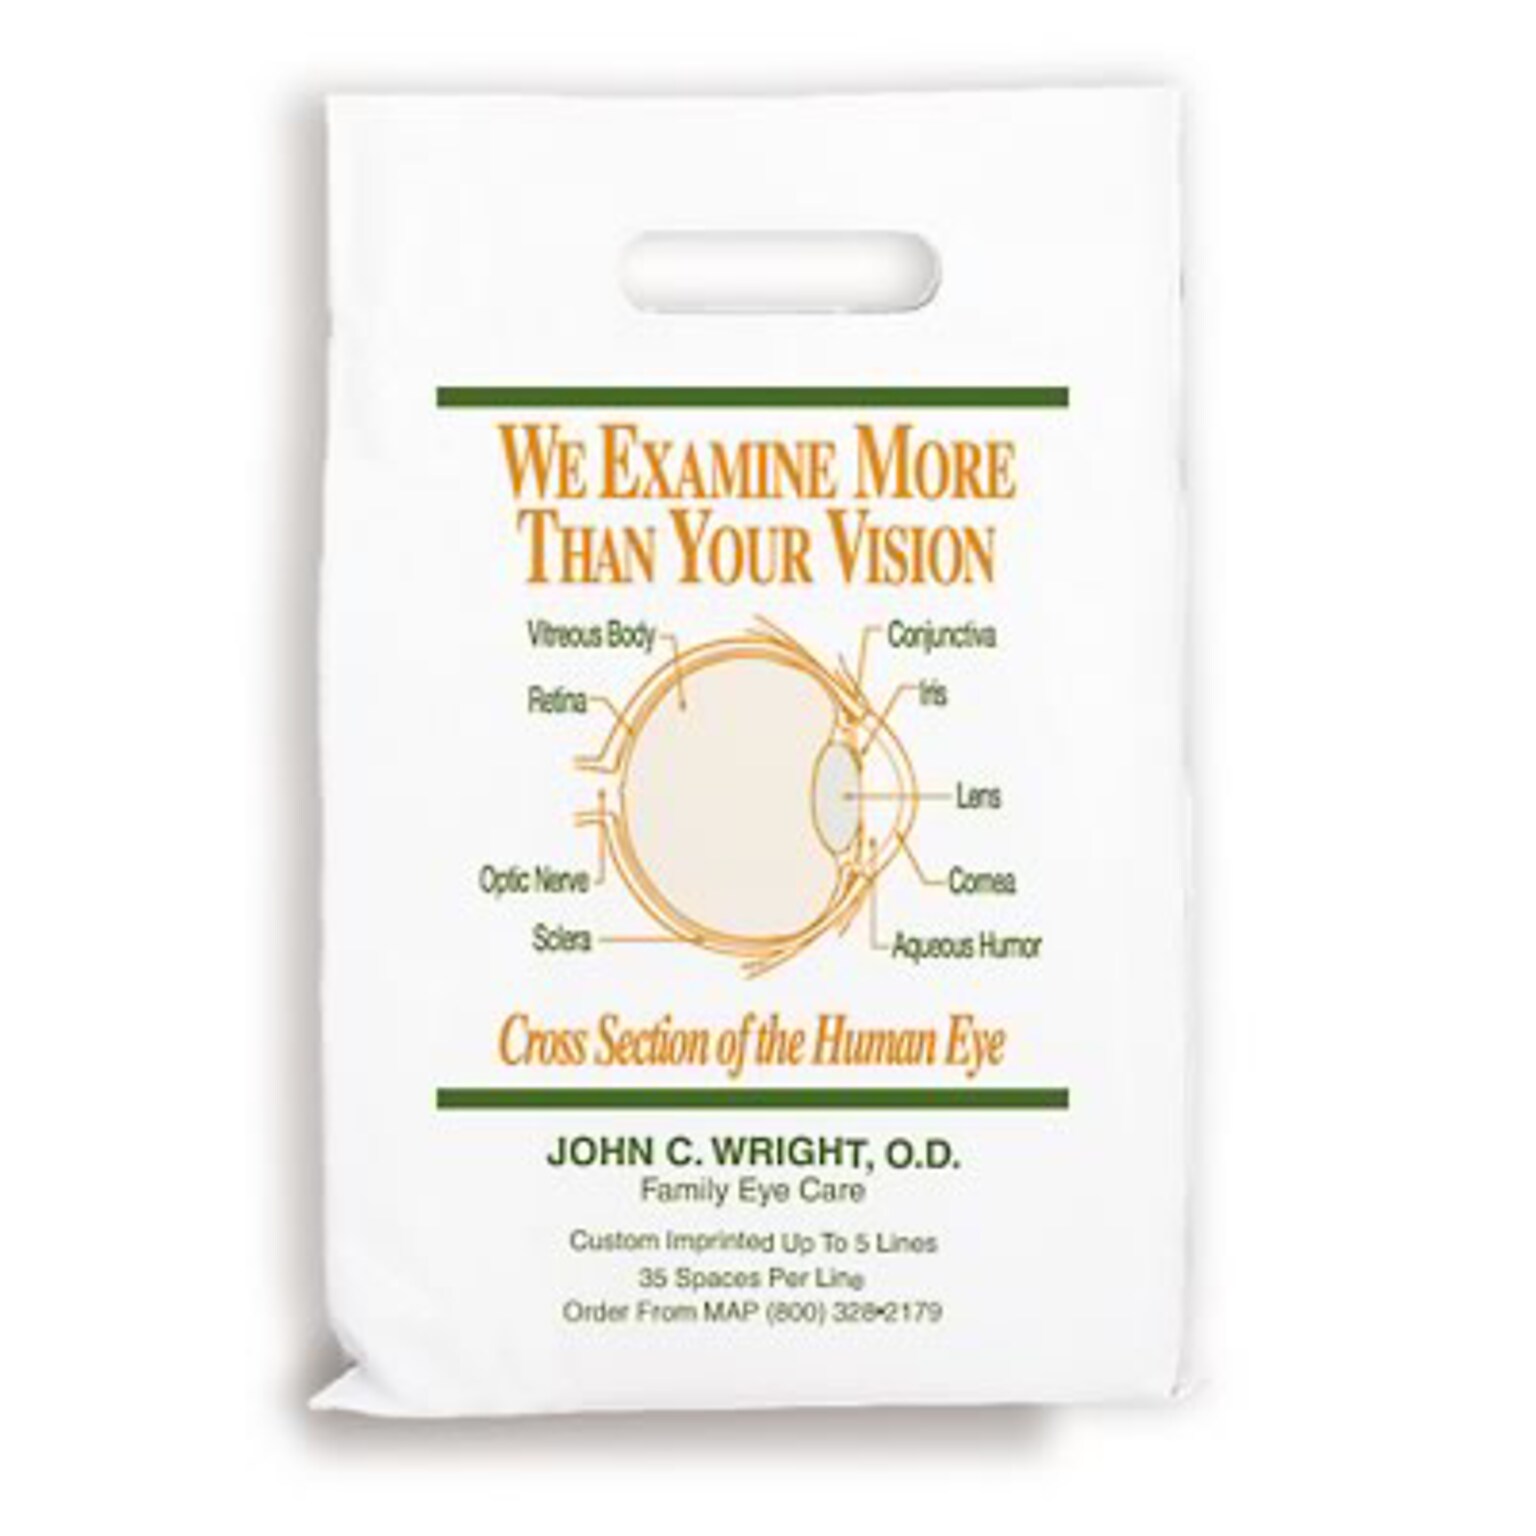 Medical Arts Press® Eye Care Personalized Large 2-Color Supply Bags; 9 x 13, We examine more than..., 100 Bags, (633571)